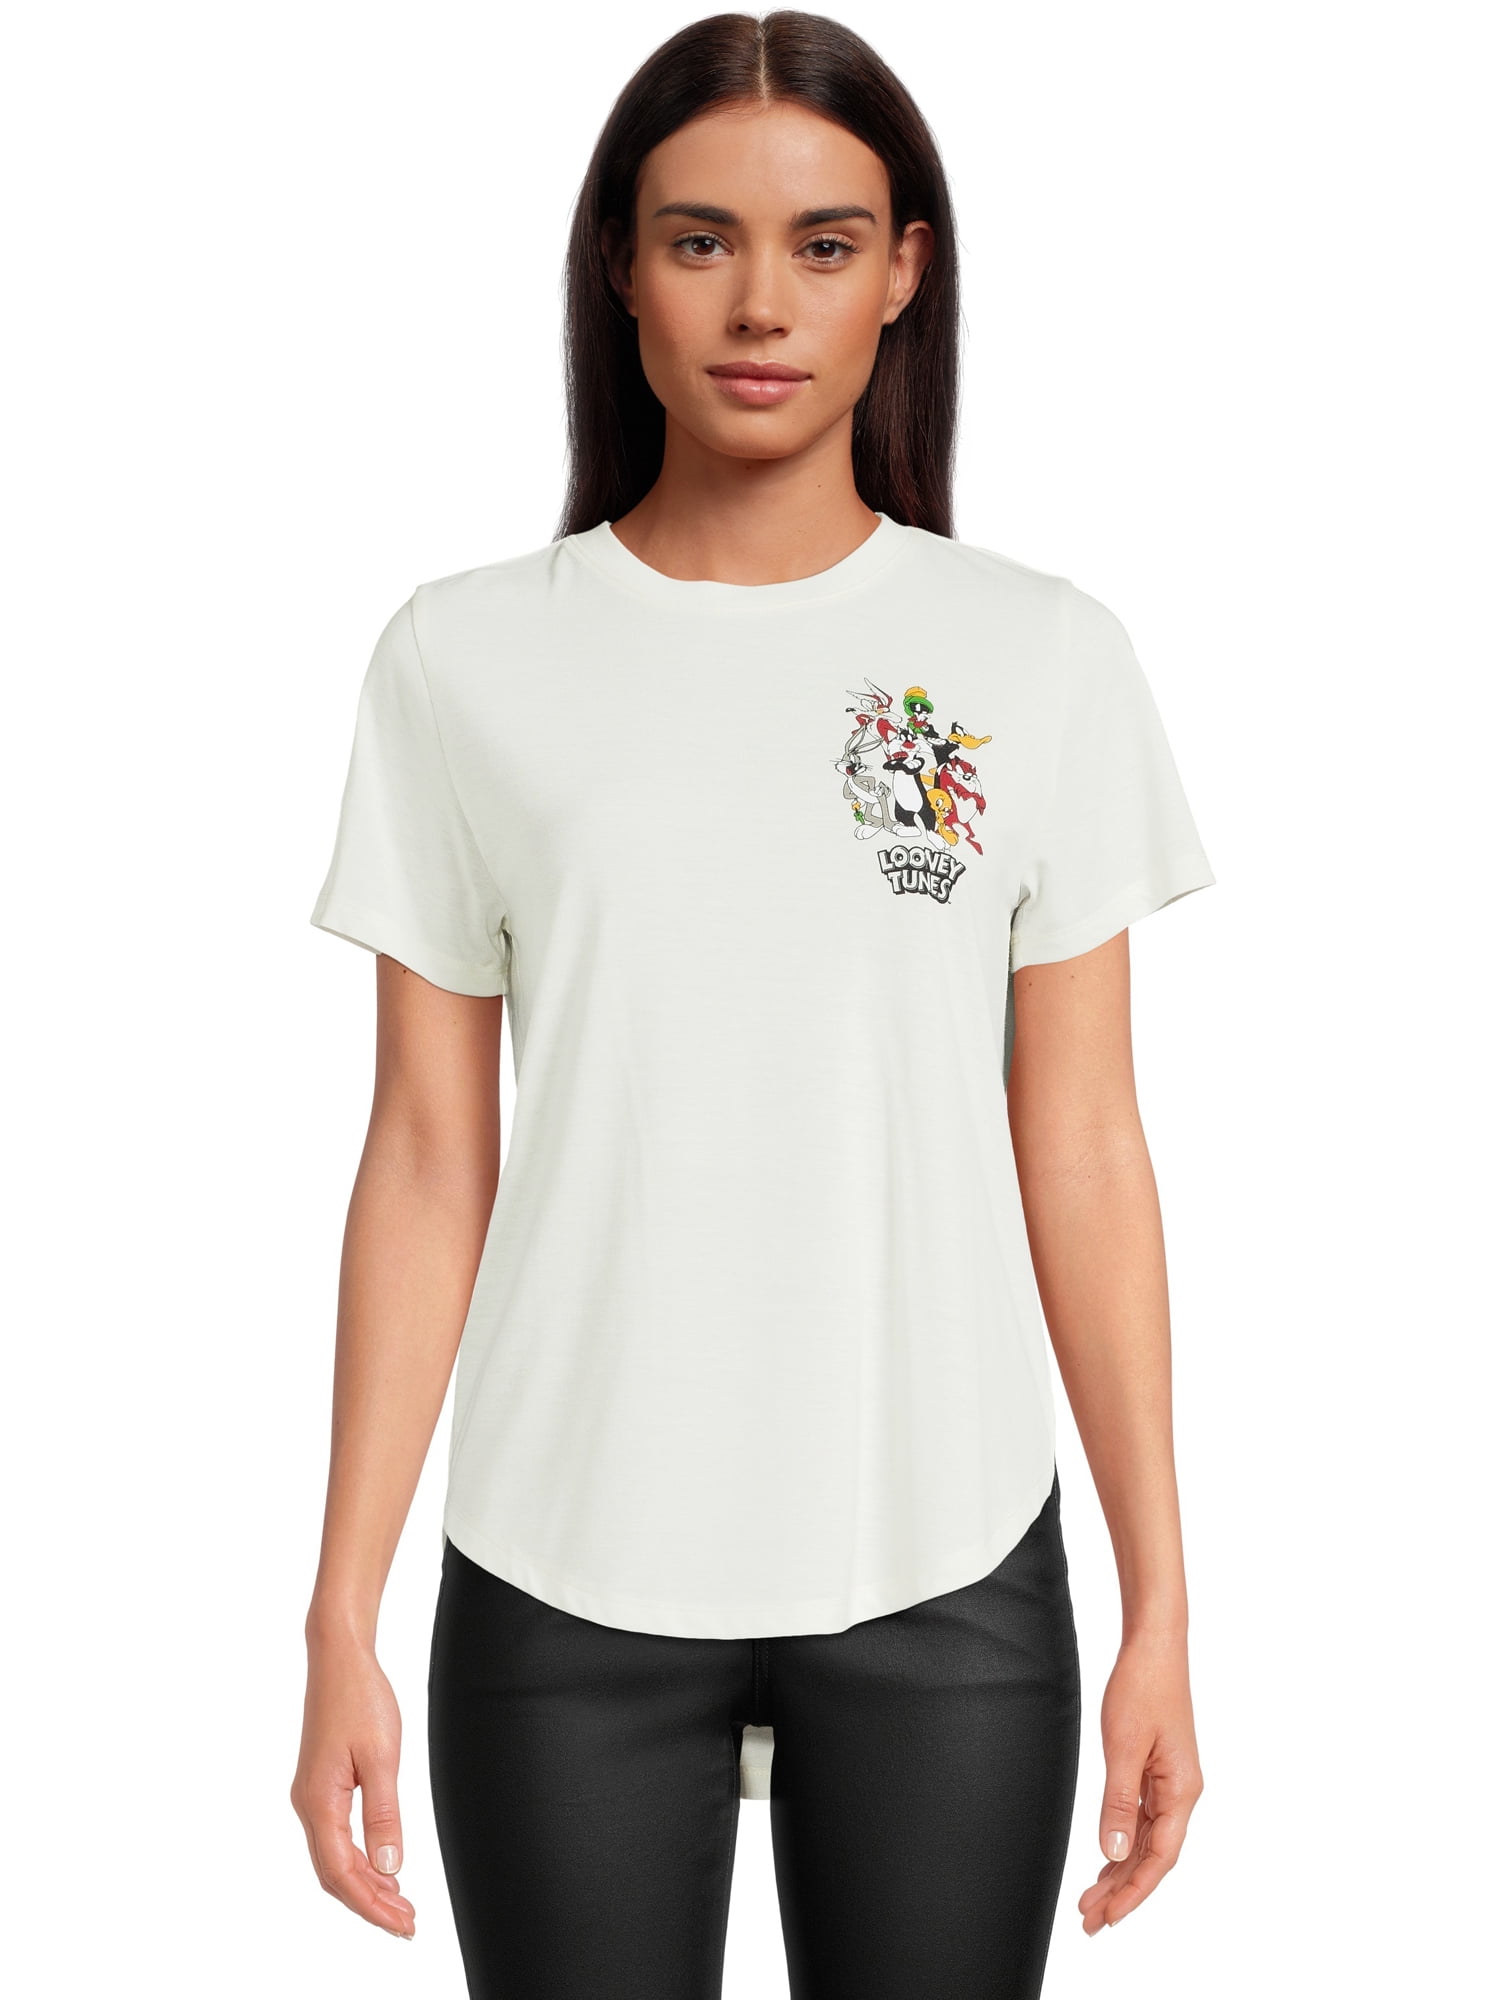 Looney Tunes LT Group Women's T-Shirt with Short Sleeves, Sizes XS-XXXL